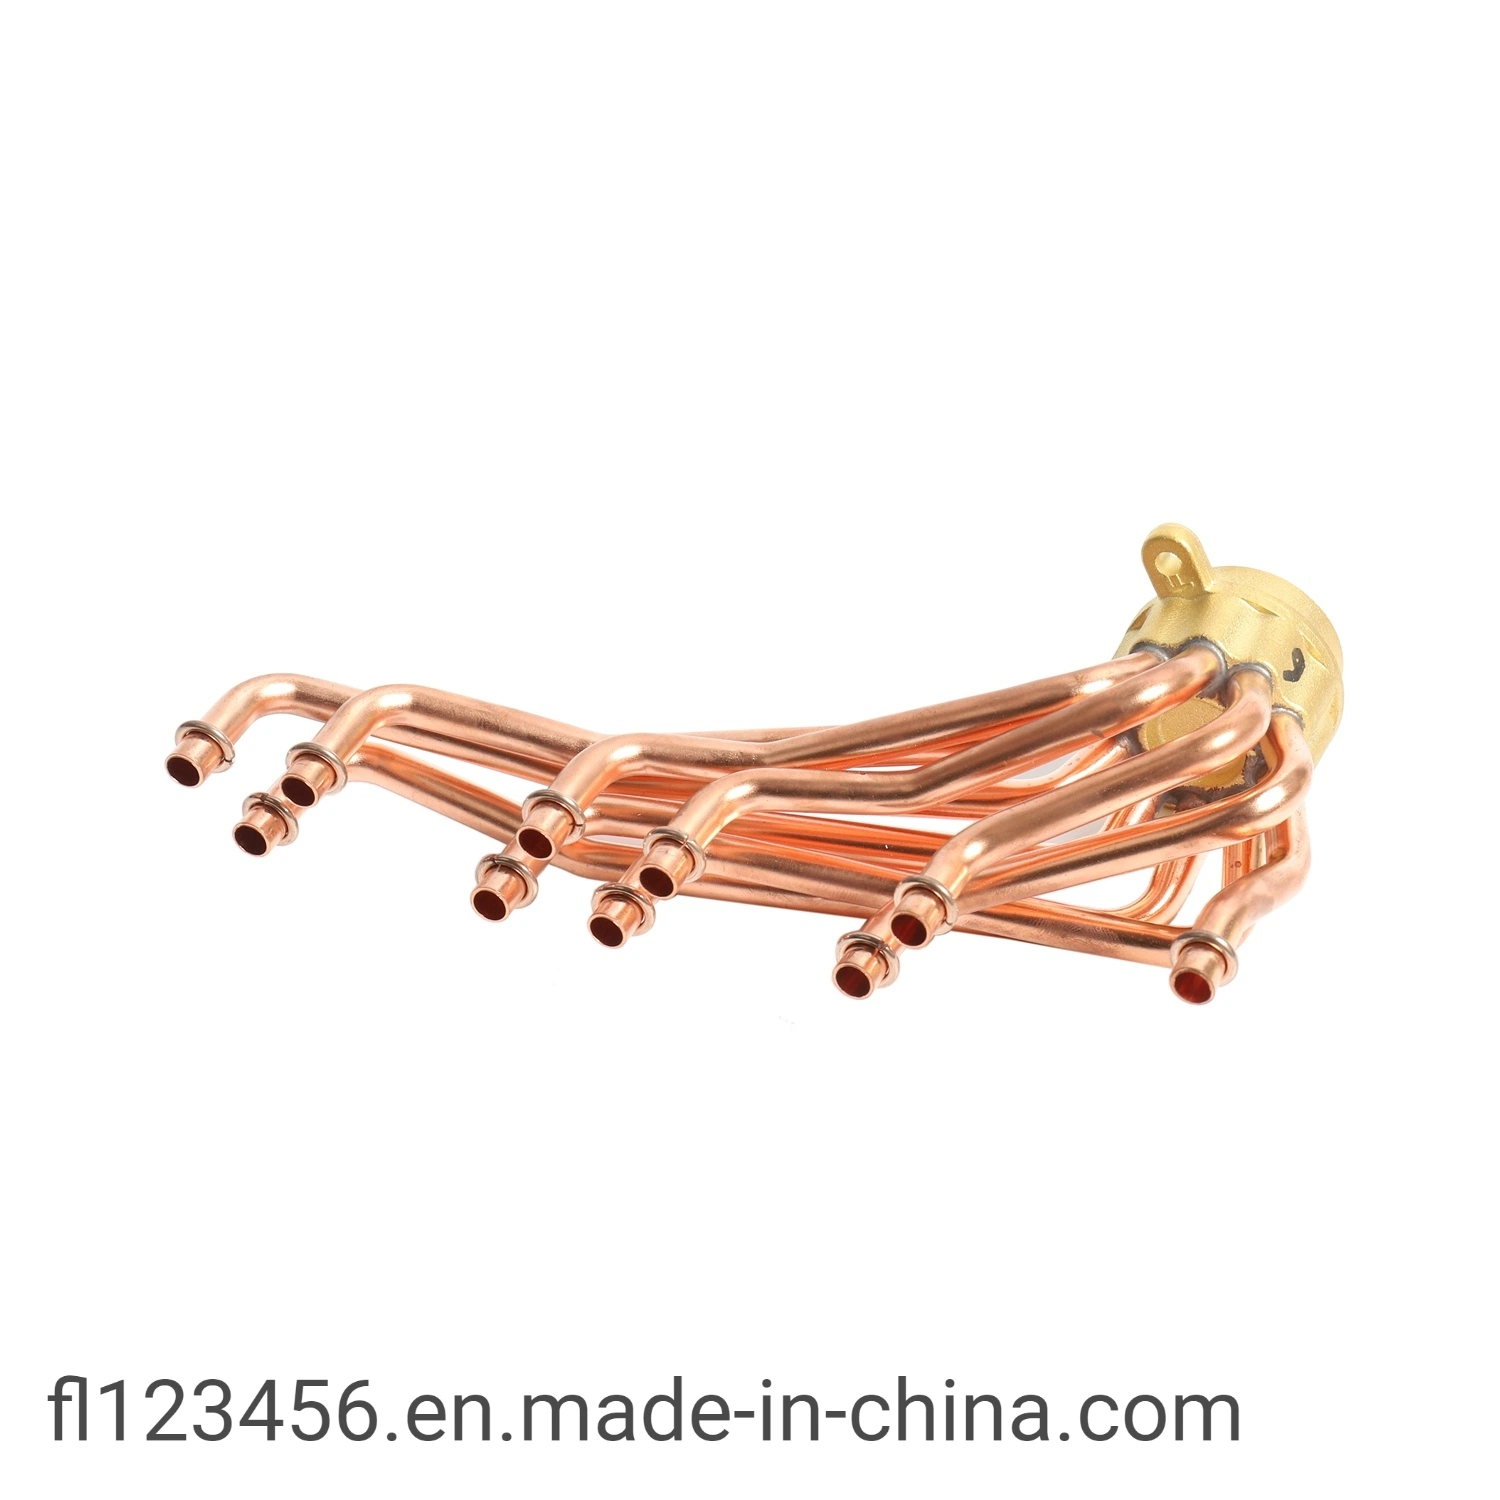 HVAC Copper Fittings, Air Conditioner Parts, Air Conditioning Internal Refrigeration Weld Components